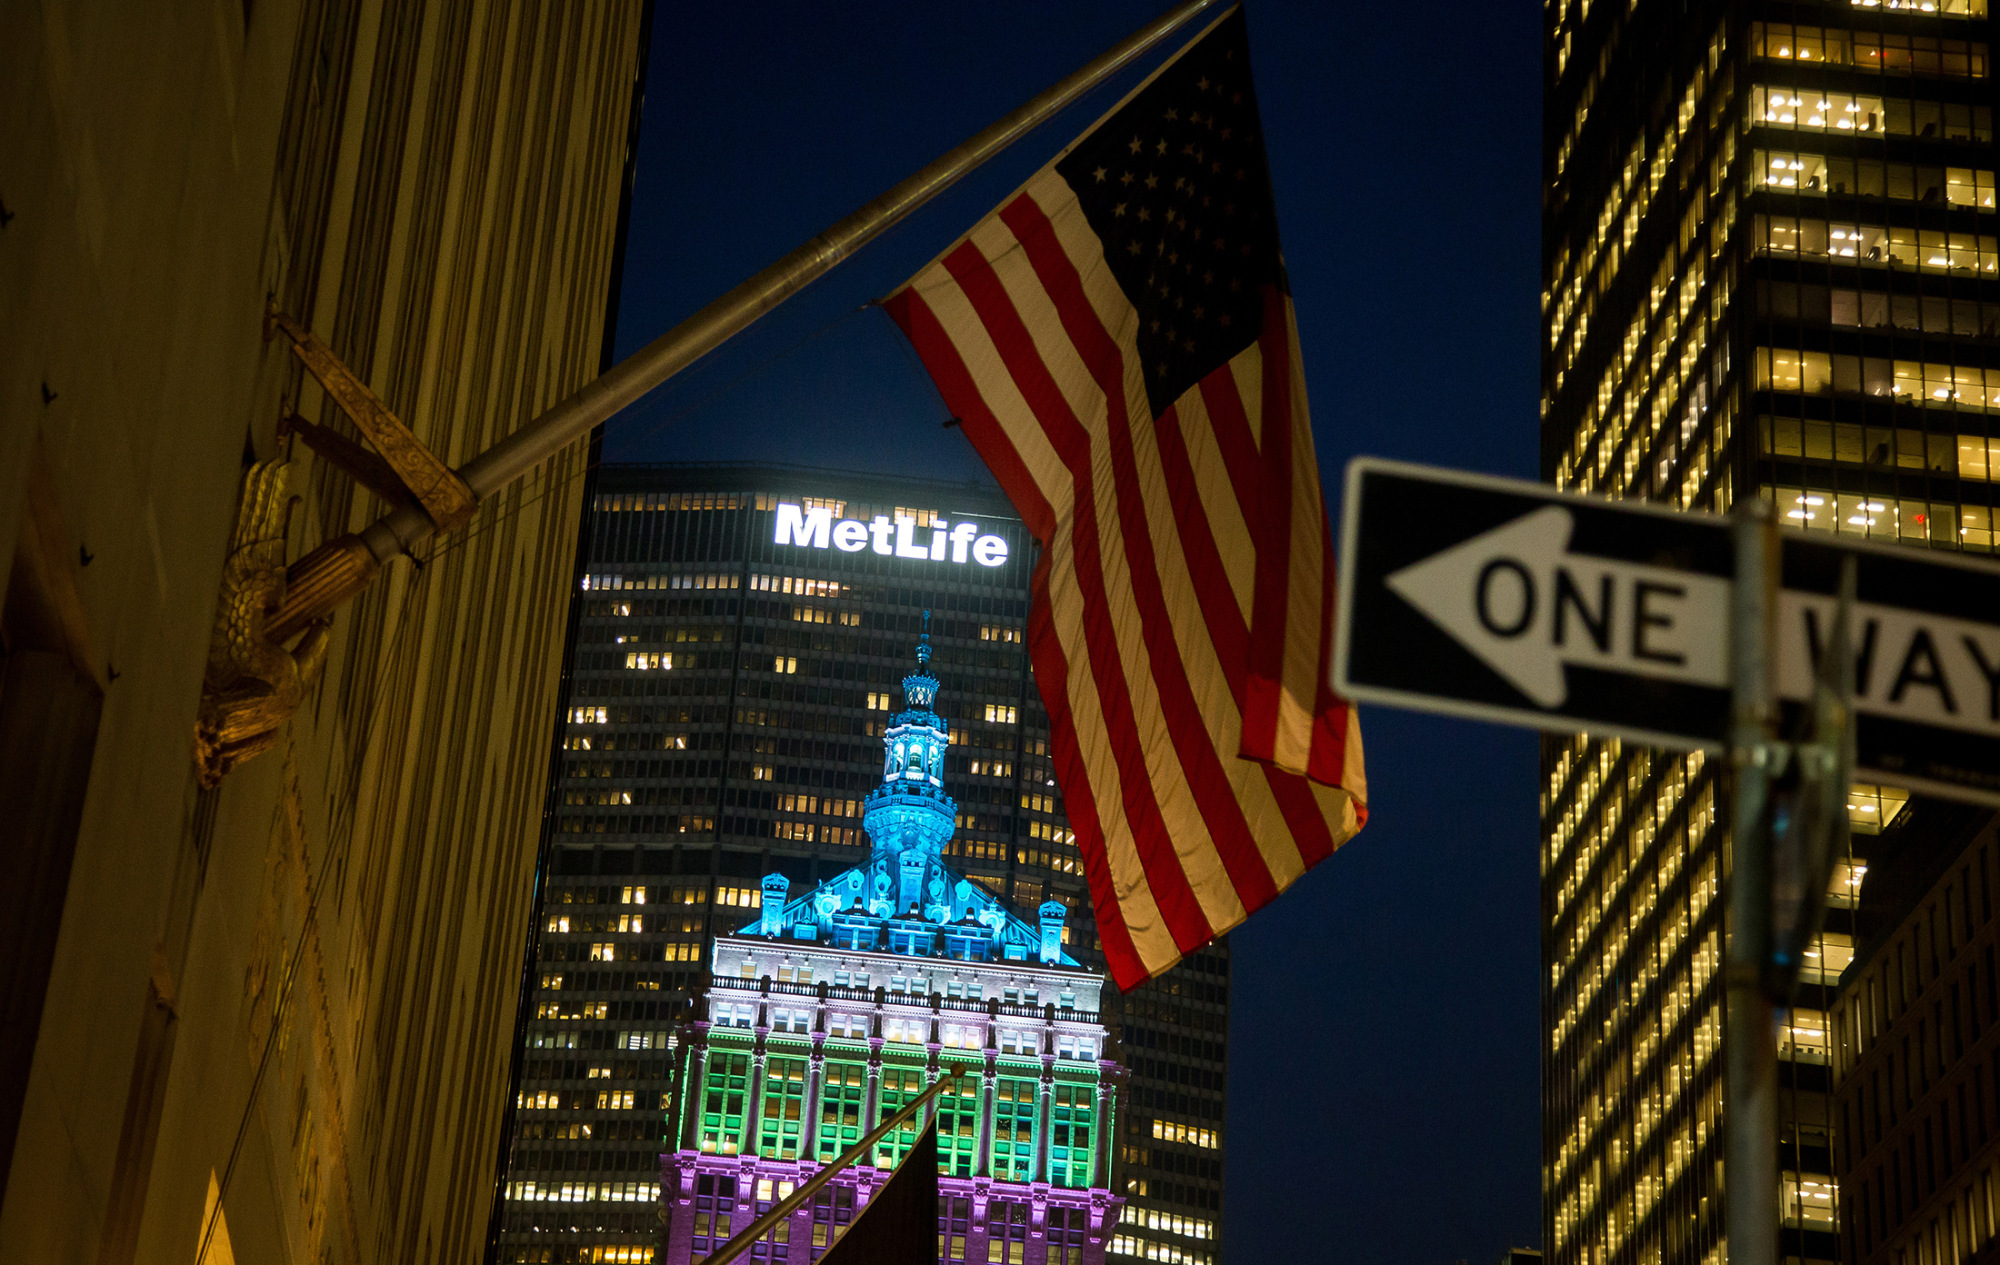 The MetLife Inc. headquarters building stands behind the Helmsley Building in New York.
